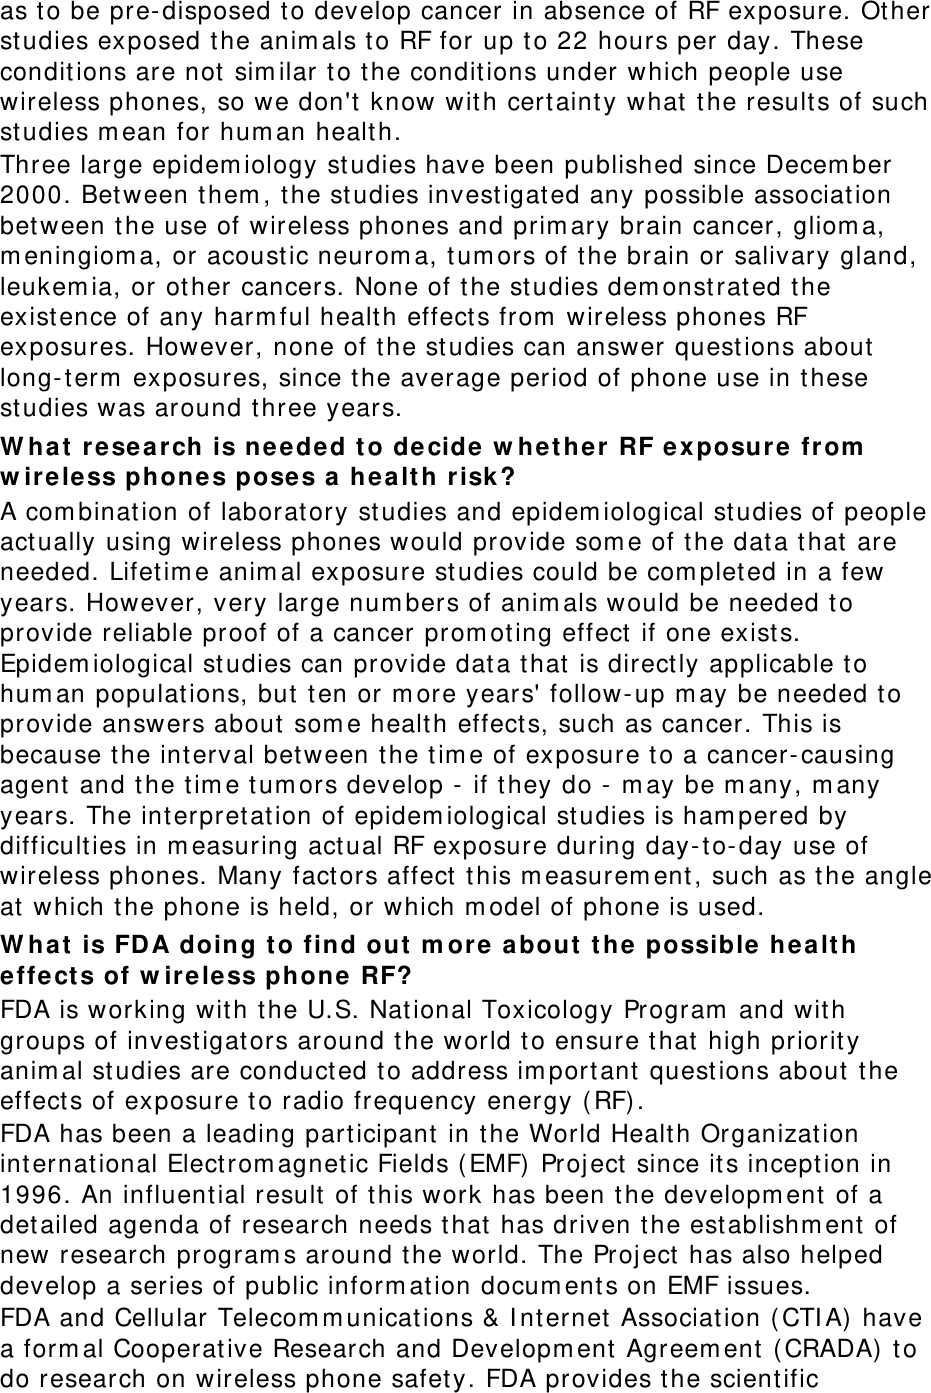 as to be pre- disposed to develop cancer in absence of RF exposure. Ot her studies exposed the anim als to RF for up to 22 hours per day. These condit ions are not sim ilar t o t he condit ions under which people use wireless phones, so we don&apos;t  know wit h certainty what  t he result s of such studies m ean for hum an health. Three large epidem iology studies have been published since Decem ber 2000. Bet ween t hem , t he studies invest igat ed any possible association bet ween t he use of wireless phones and prim ary brain cancer, gliom a, m eningiom a, or acoust ic neurom a, t um ors of the brain or salivary gland, leukem ia, or other cancers. None of t he st udies dem onst rat ed the exist ence of any harm ful healt h effect s from  wireless phones RF exposures. However, none of t he st udies can answer questions about long- t erm  exposures, since t he average period of phone use in t hese studies was around t hree years. W h a t  r e se a rch is needed t o decide w hether RF ex posure fr om  w ire le ss phones pose s a hea lt h risk ? A com binat ion of laborat ory st udies and epidem iological st udies of people act ually using wireless phones would provide som e of t he dat a t hat  are needed. Lifetim e anim al exposure st udies could be com plet ed in a few years. However, very large num bers of anim als would be needed t o provide reliable proof of a cancer prom ot ing effect if one exist s. Epidem iological st udies can provide dat a that  is direct ly applicable t o hum an populat ions, but t en or m ore years&apos; follow- up m ay be needed to provide answers about som e healt h effect s, such as cancer. This is because t he interval between t he t im e of exposure t o a cancer-causing agent  and the t im e t um ors develop -  if t hey do -  m ay be m any, m any years. The int erpret at ion of epidem iological st udies is ham pered by difficult ies in m easuring act ual RF exposure during day-t o- day use of wireless phones. Many factors affect  t his m easurem ent , such as t he angle at which t he phone is held, or which m odel of phone is used. W h a t  is FDA doing t o find out  m or e  a bout  t he possible healt h effect s of w ireless phone RF? FDA is working wit h t he U.S. Nat ional Toxicology Program  and wit h groups of investigat ors around t he world to ensure t hat  high priorit y anim al st udies are conduct ed t o address im port ant questions about the effects of exposure t o radio frequency energy ( RF) . FDA has been a leading part icipant in the World Healt h Organization int ernat ional Elect rom agnet ic Fields ( EMF) Proj ect  since it s incept ion in 1996. An influent ial result  of t his work has been t he developm ent  of a det ailed agenda of research needs t hat  has driven t he establishm ent of new research program s around the world. The Proj ect  has also helped develop a series of public inform at ion docum ent s on EMF issues. FDA and Cellular Telecom m unicat ions &amp; I nt ernet  Associat ion (CTI A)  have a form al Cooperat ive Research and Developm ent  Agreem ent  ( CRADA)  t o do research on wireless phone safet y. FDA provides t he scient ific 